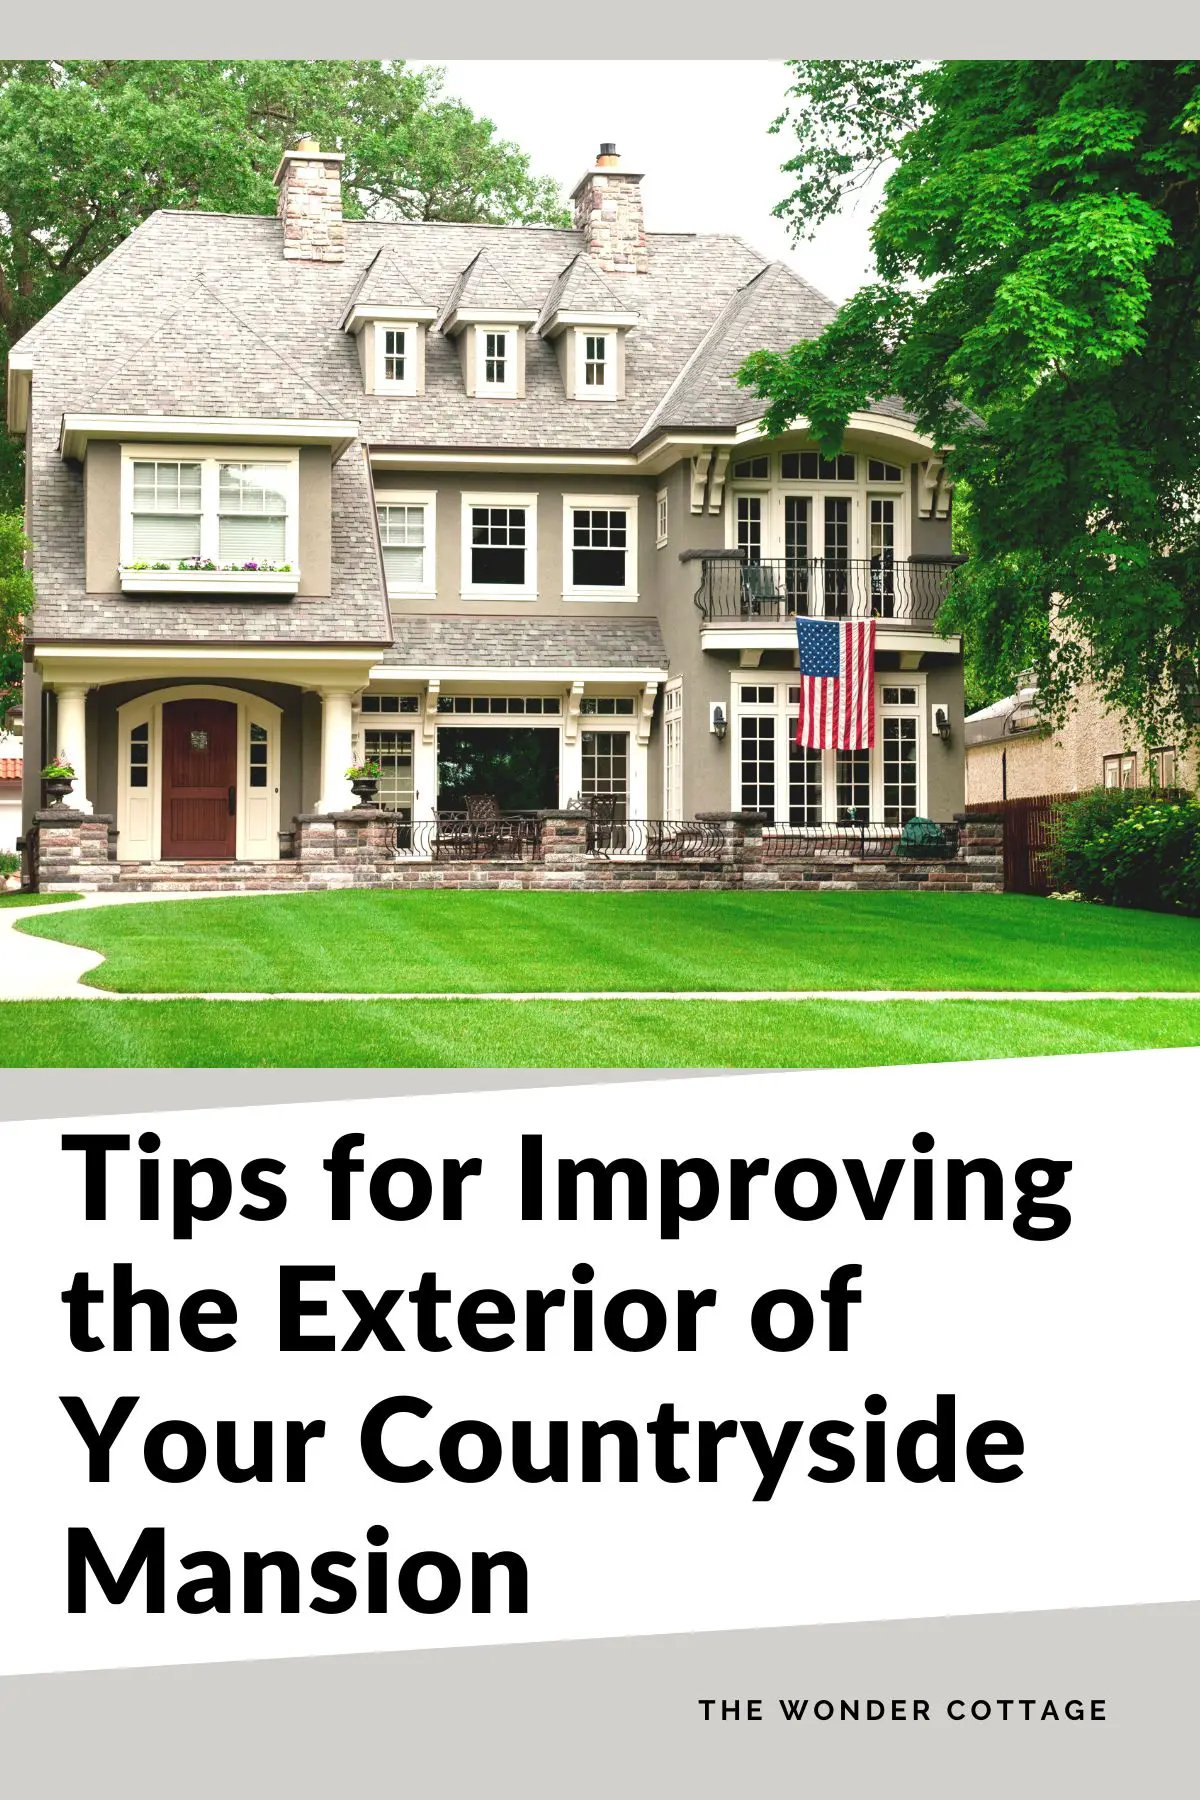 Tips for Improving the Exterior of Your Countryside Mansion